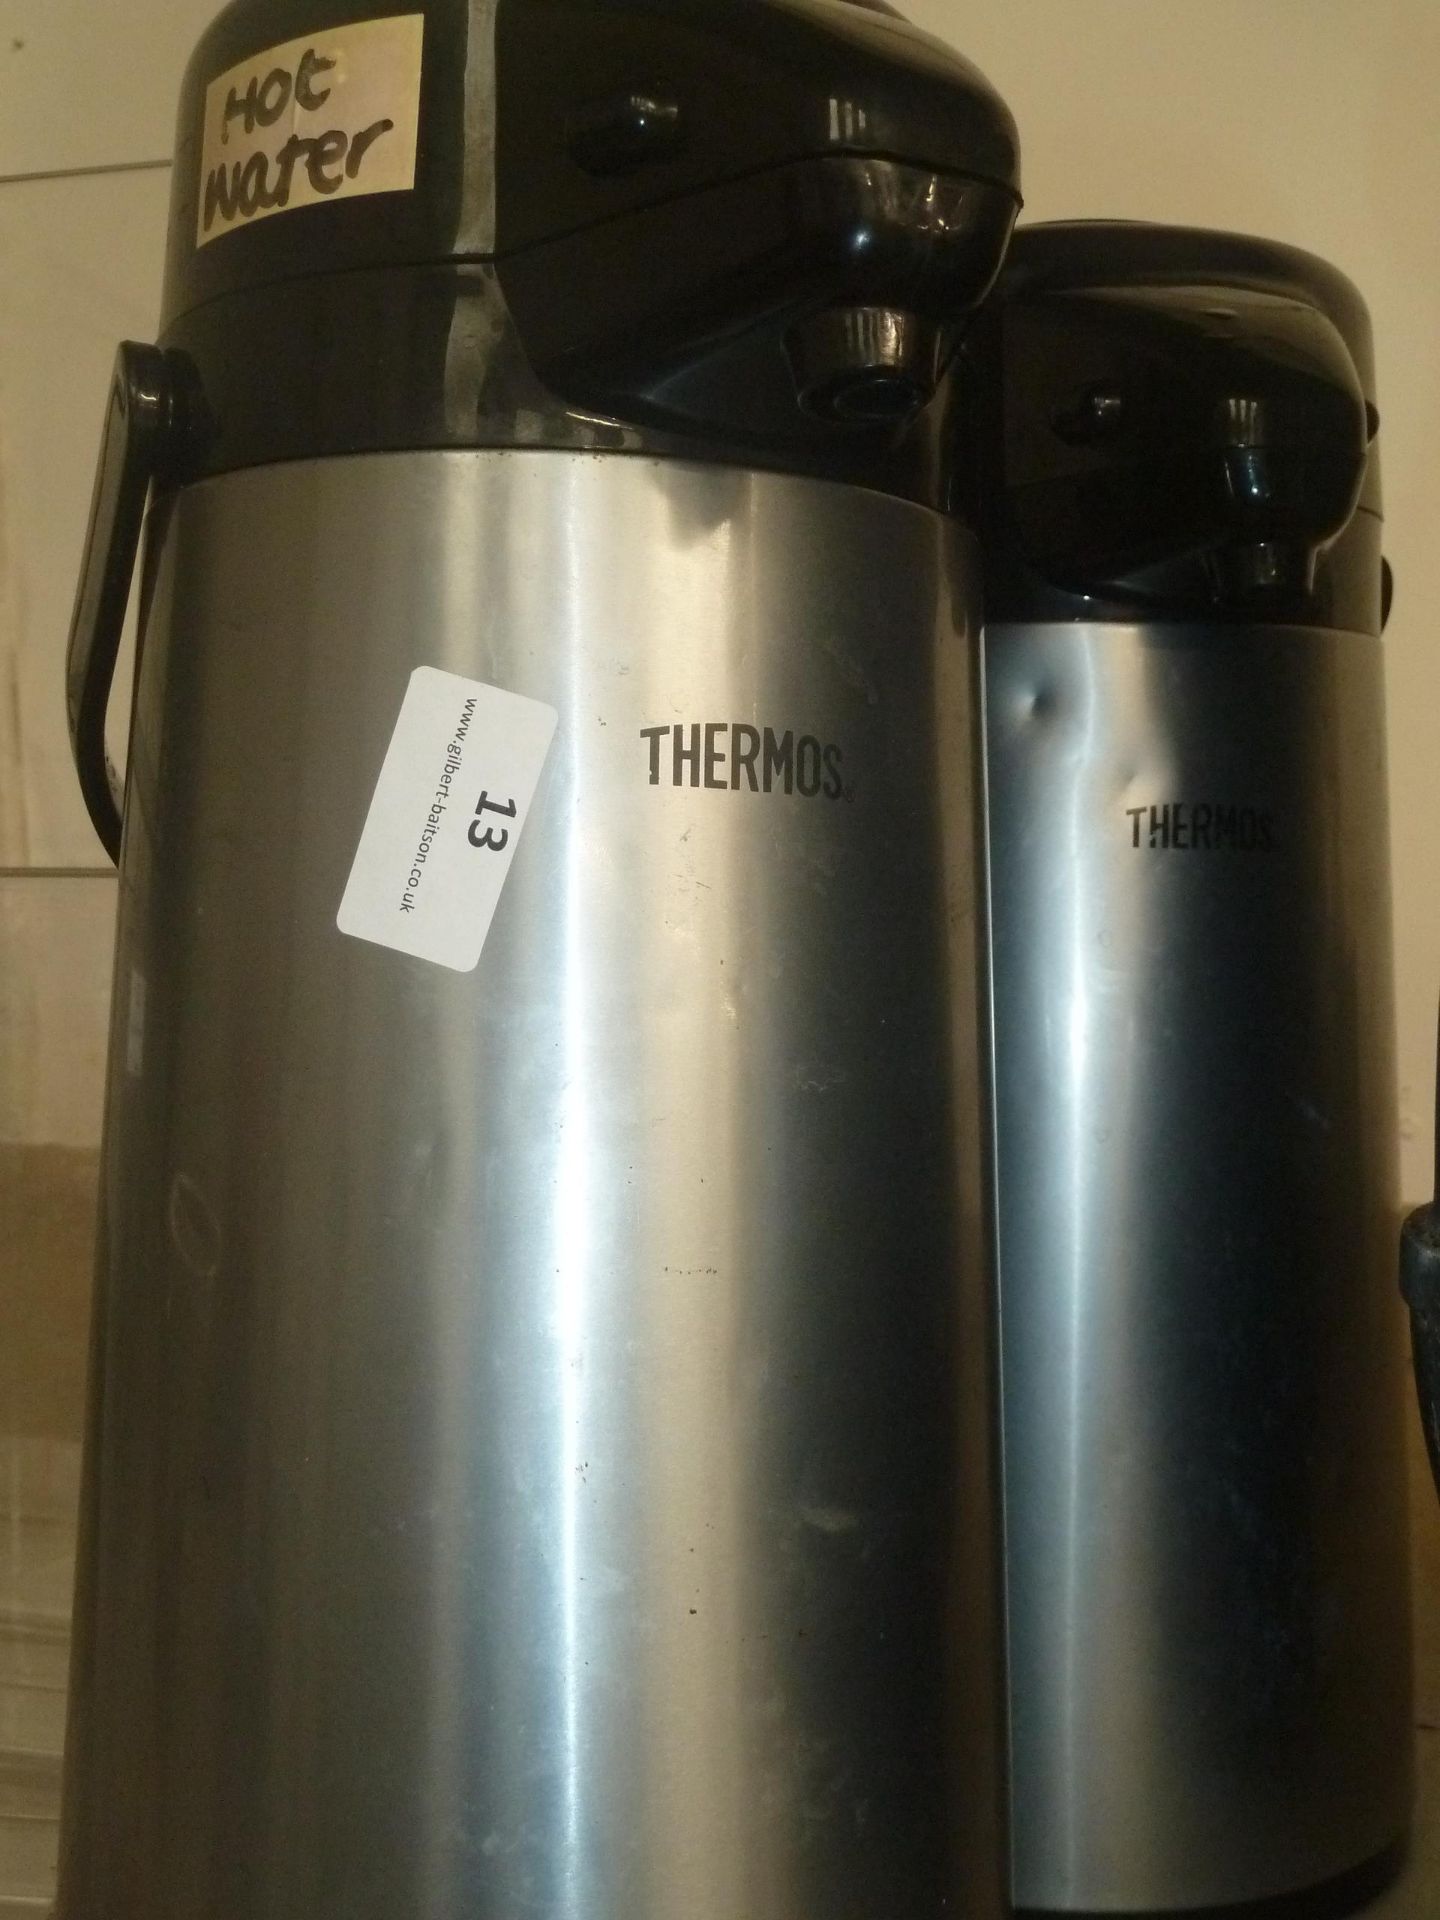 * 2 x Thermos hot drink canisters with dispense tap